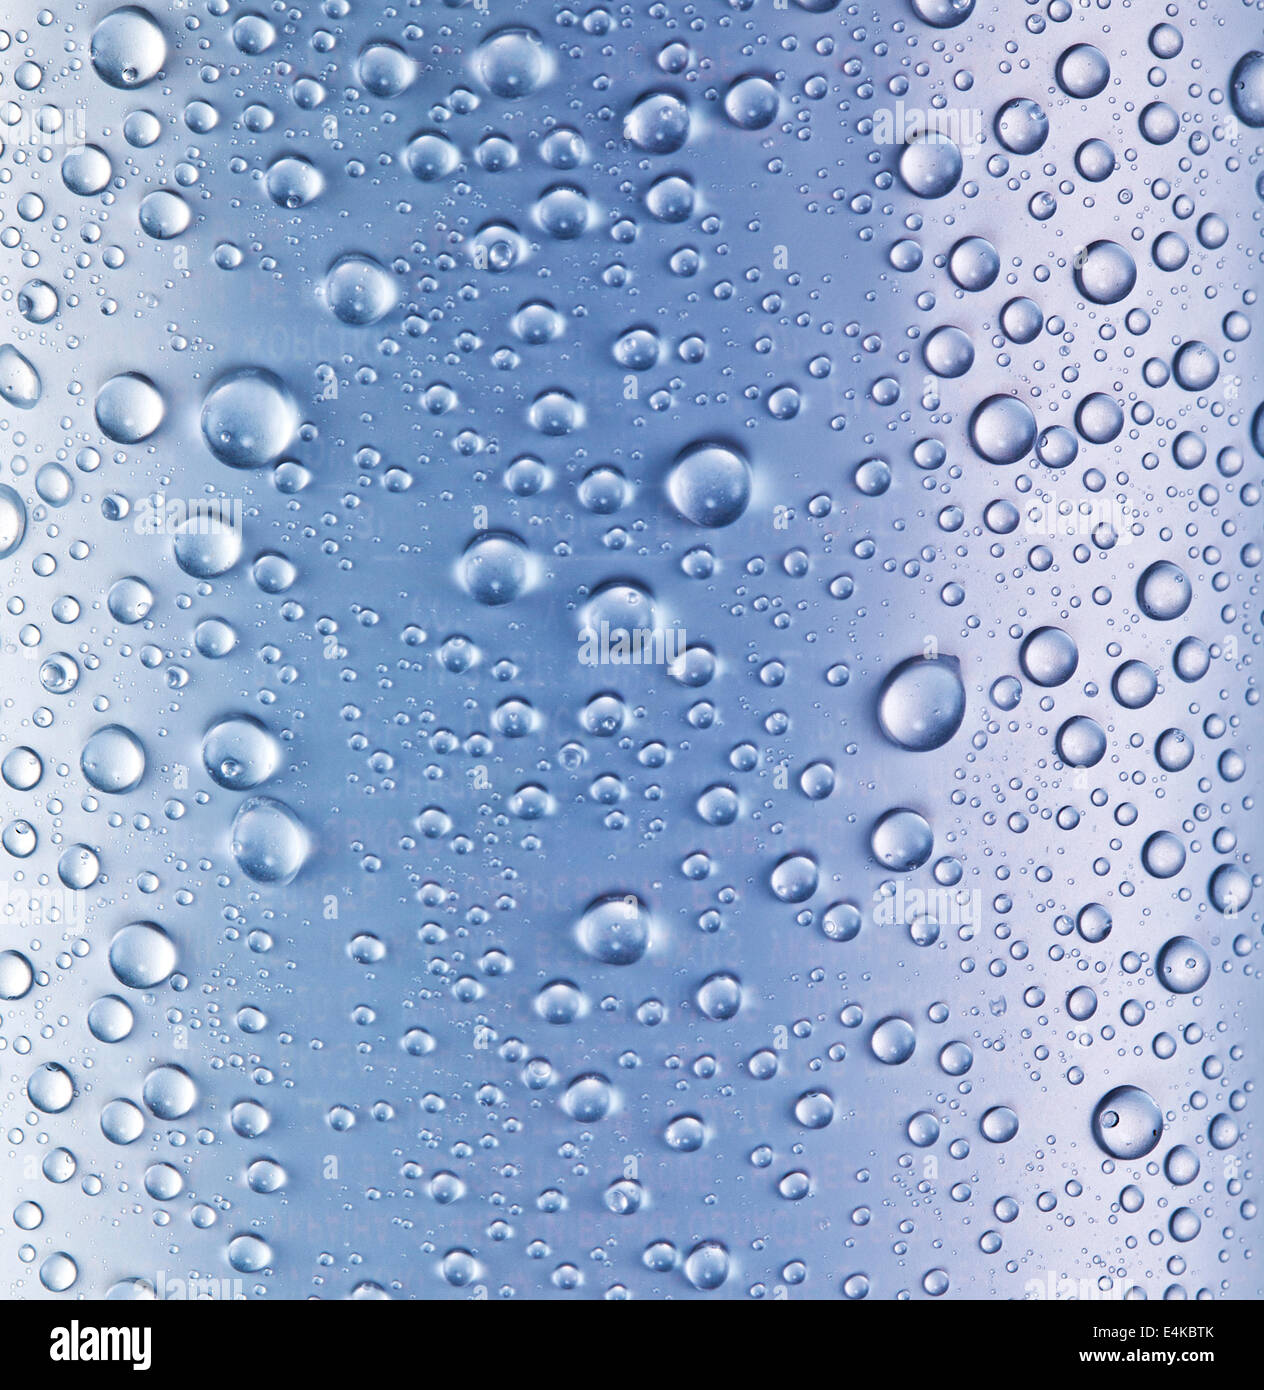 Water drops over blue glass background. Stock Photo